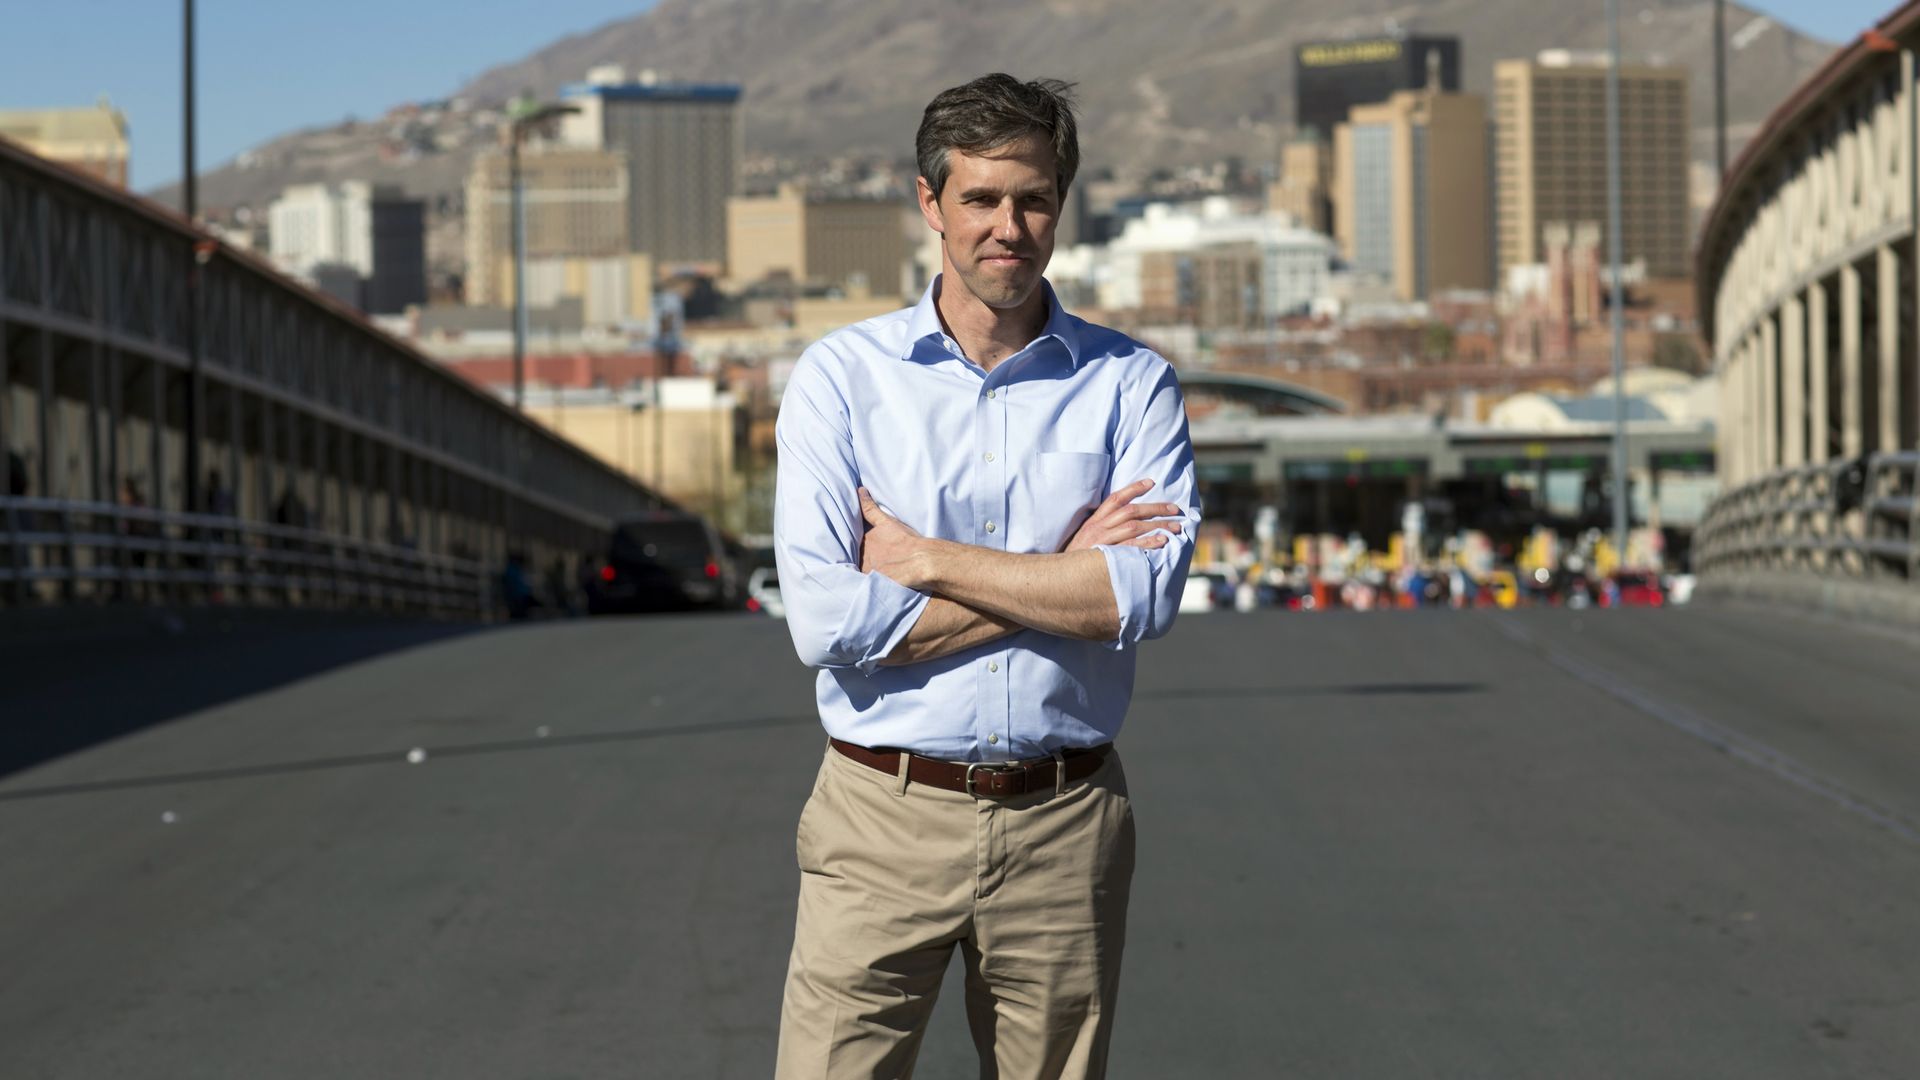 Texas Senate candidate Beto O'Rouke stands for a photo between the Mexico-Texas border